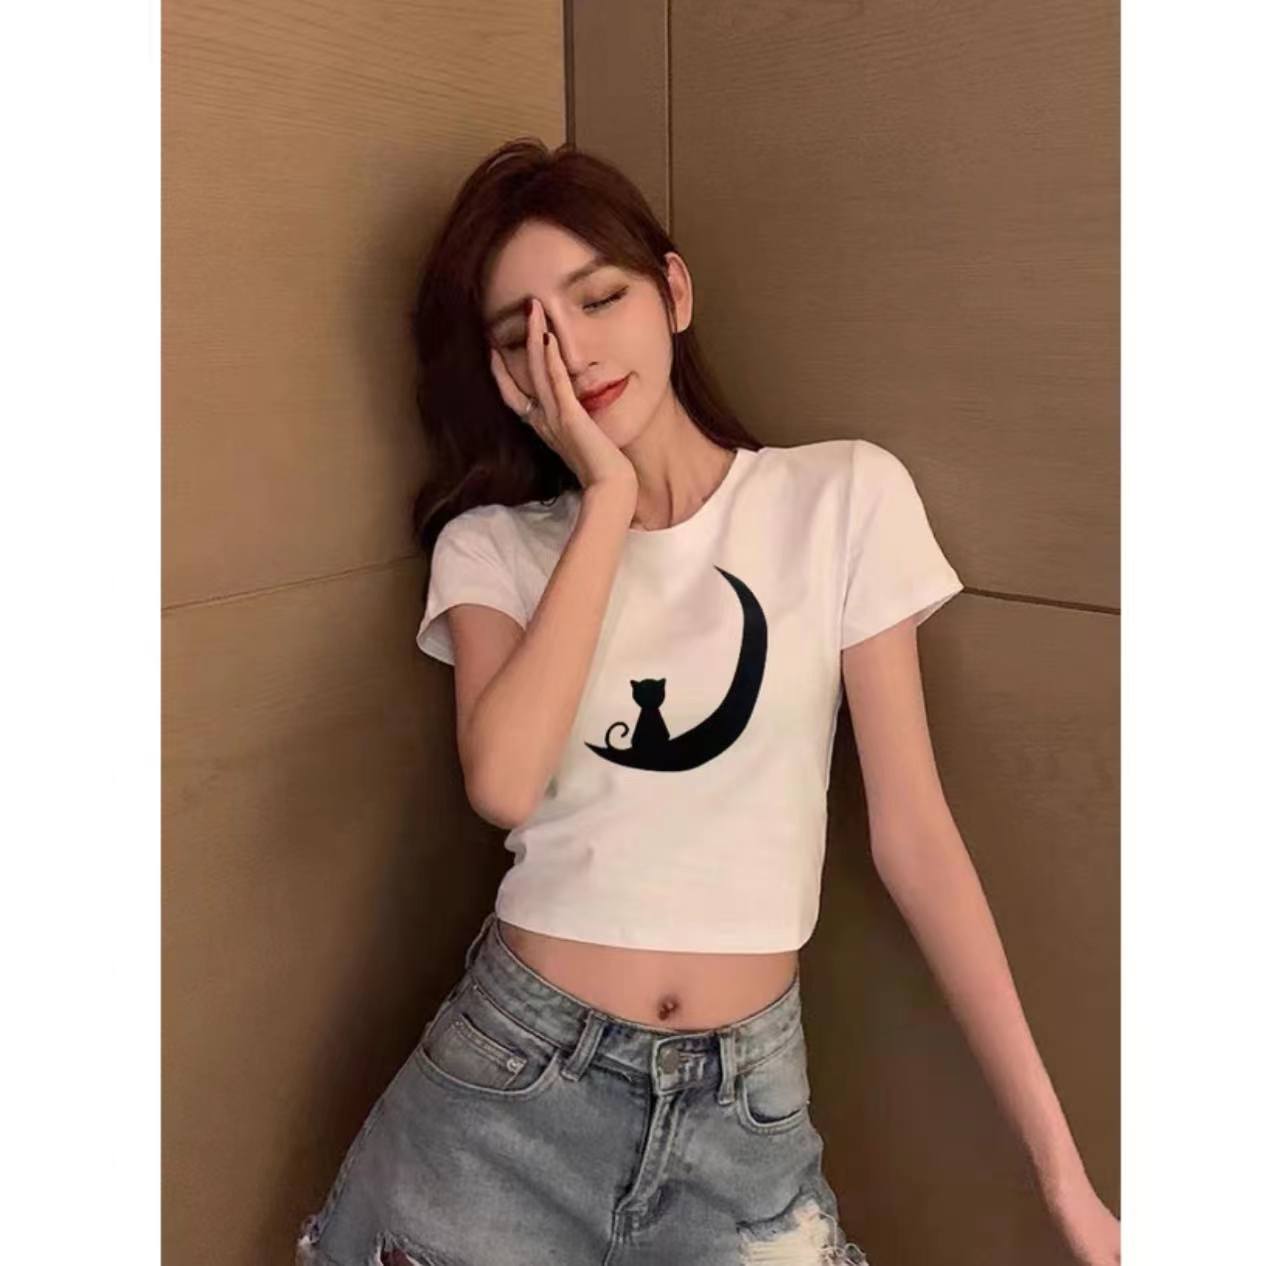 NEW FASHION CROP TOP 2 COLORS FOR SEXY GIRL